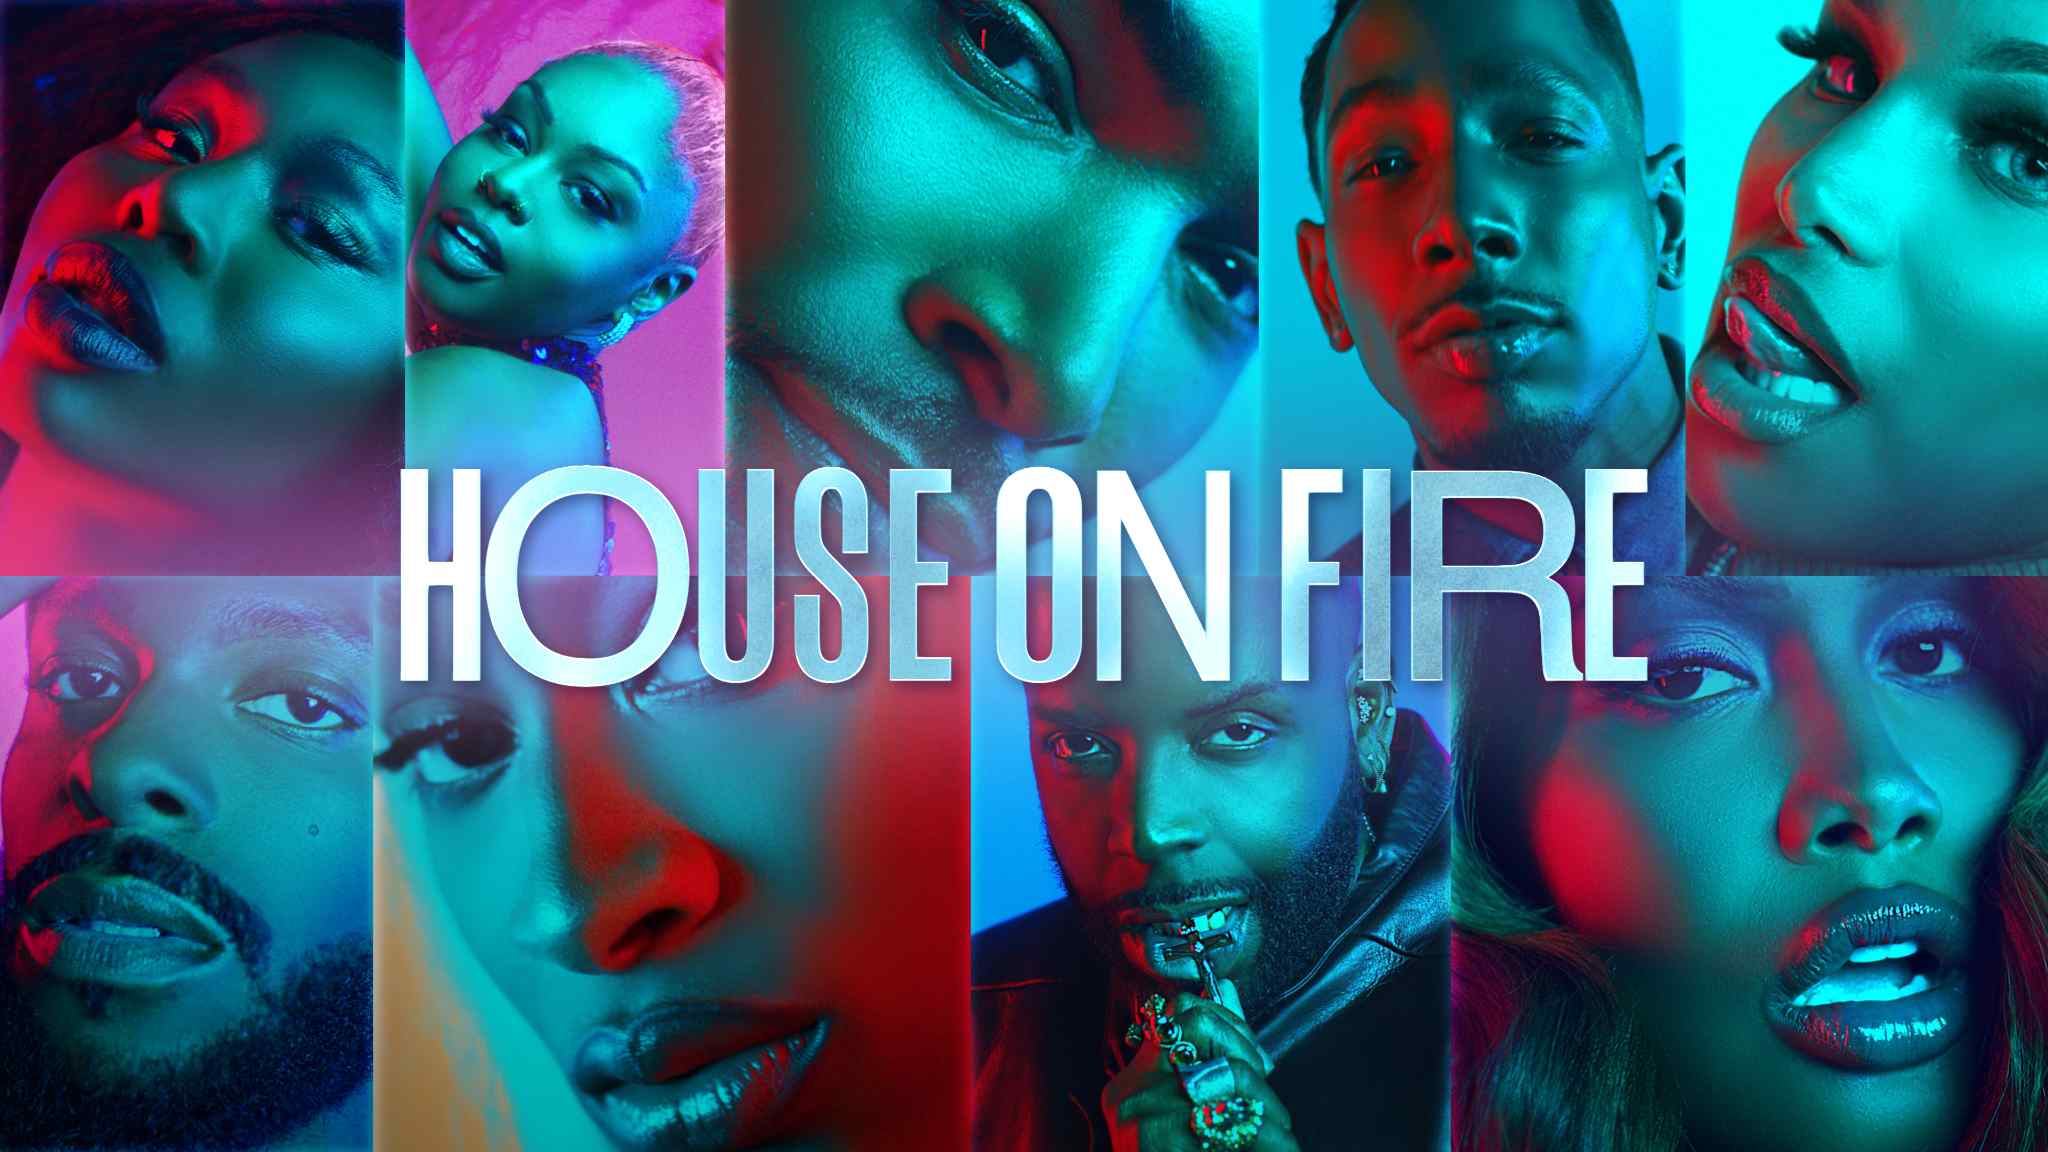 House Of Miyake-Mugler Series 'House On Fire' Set At Global 'Drag Race' Home WOW Presents Plus